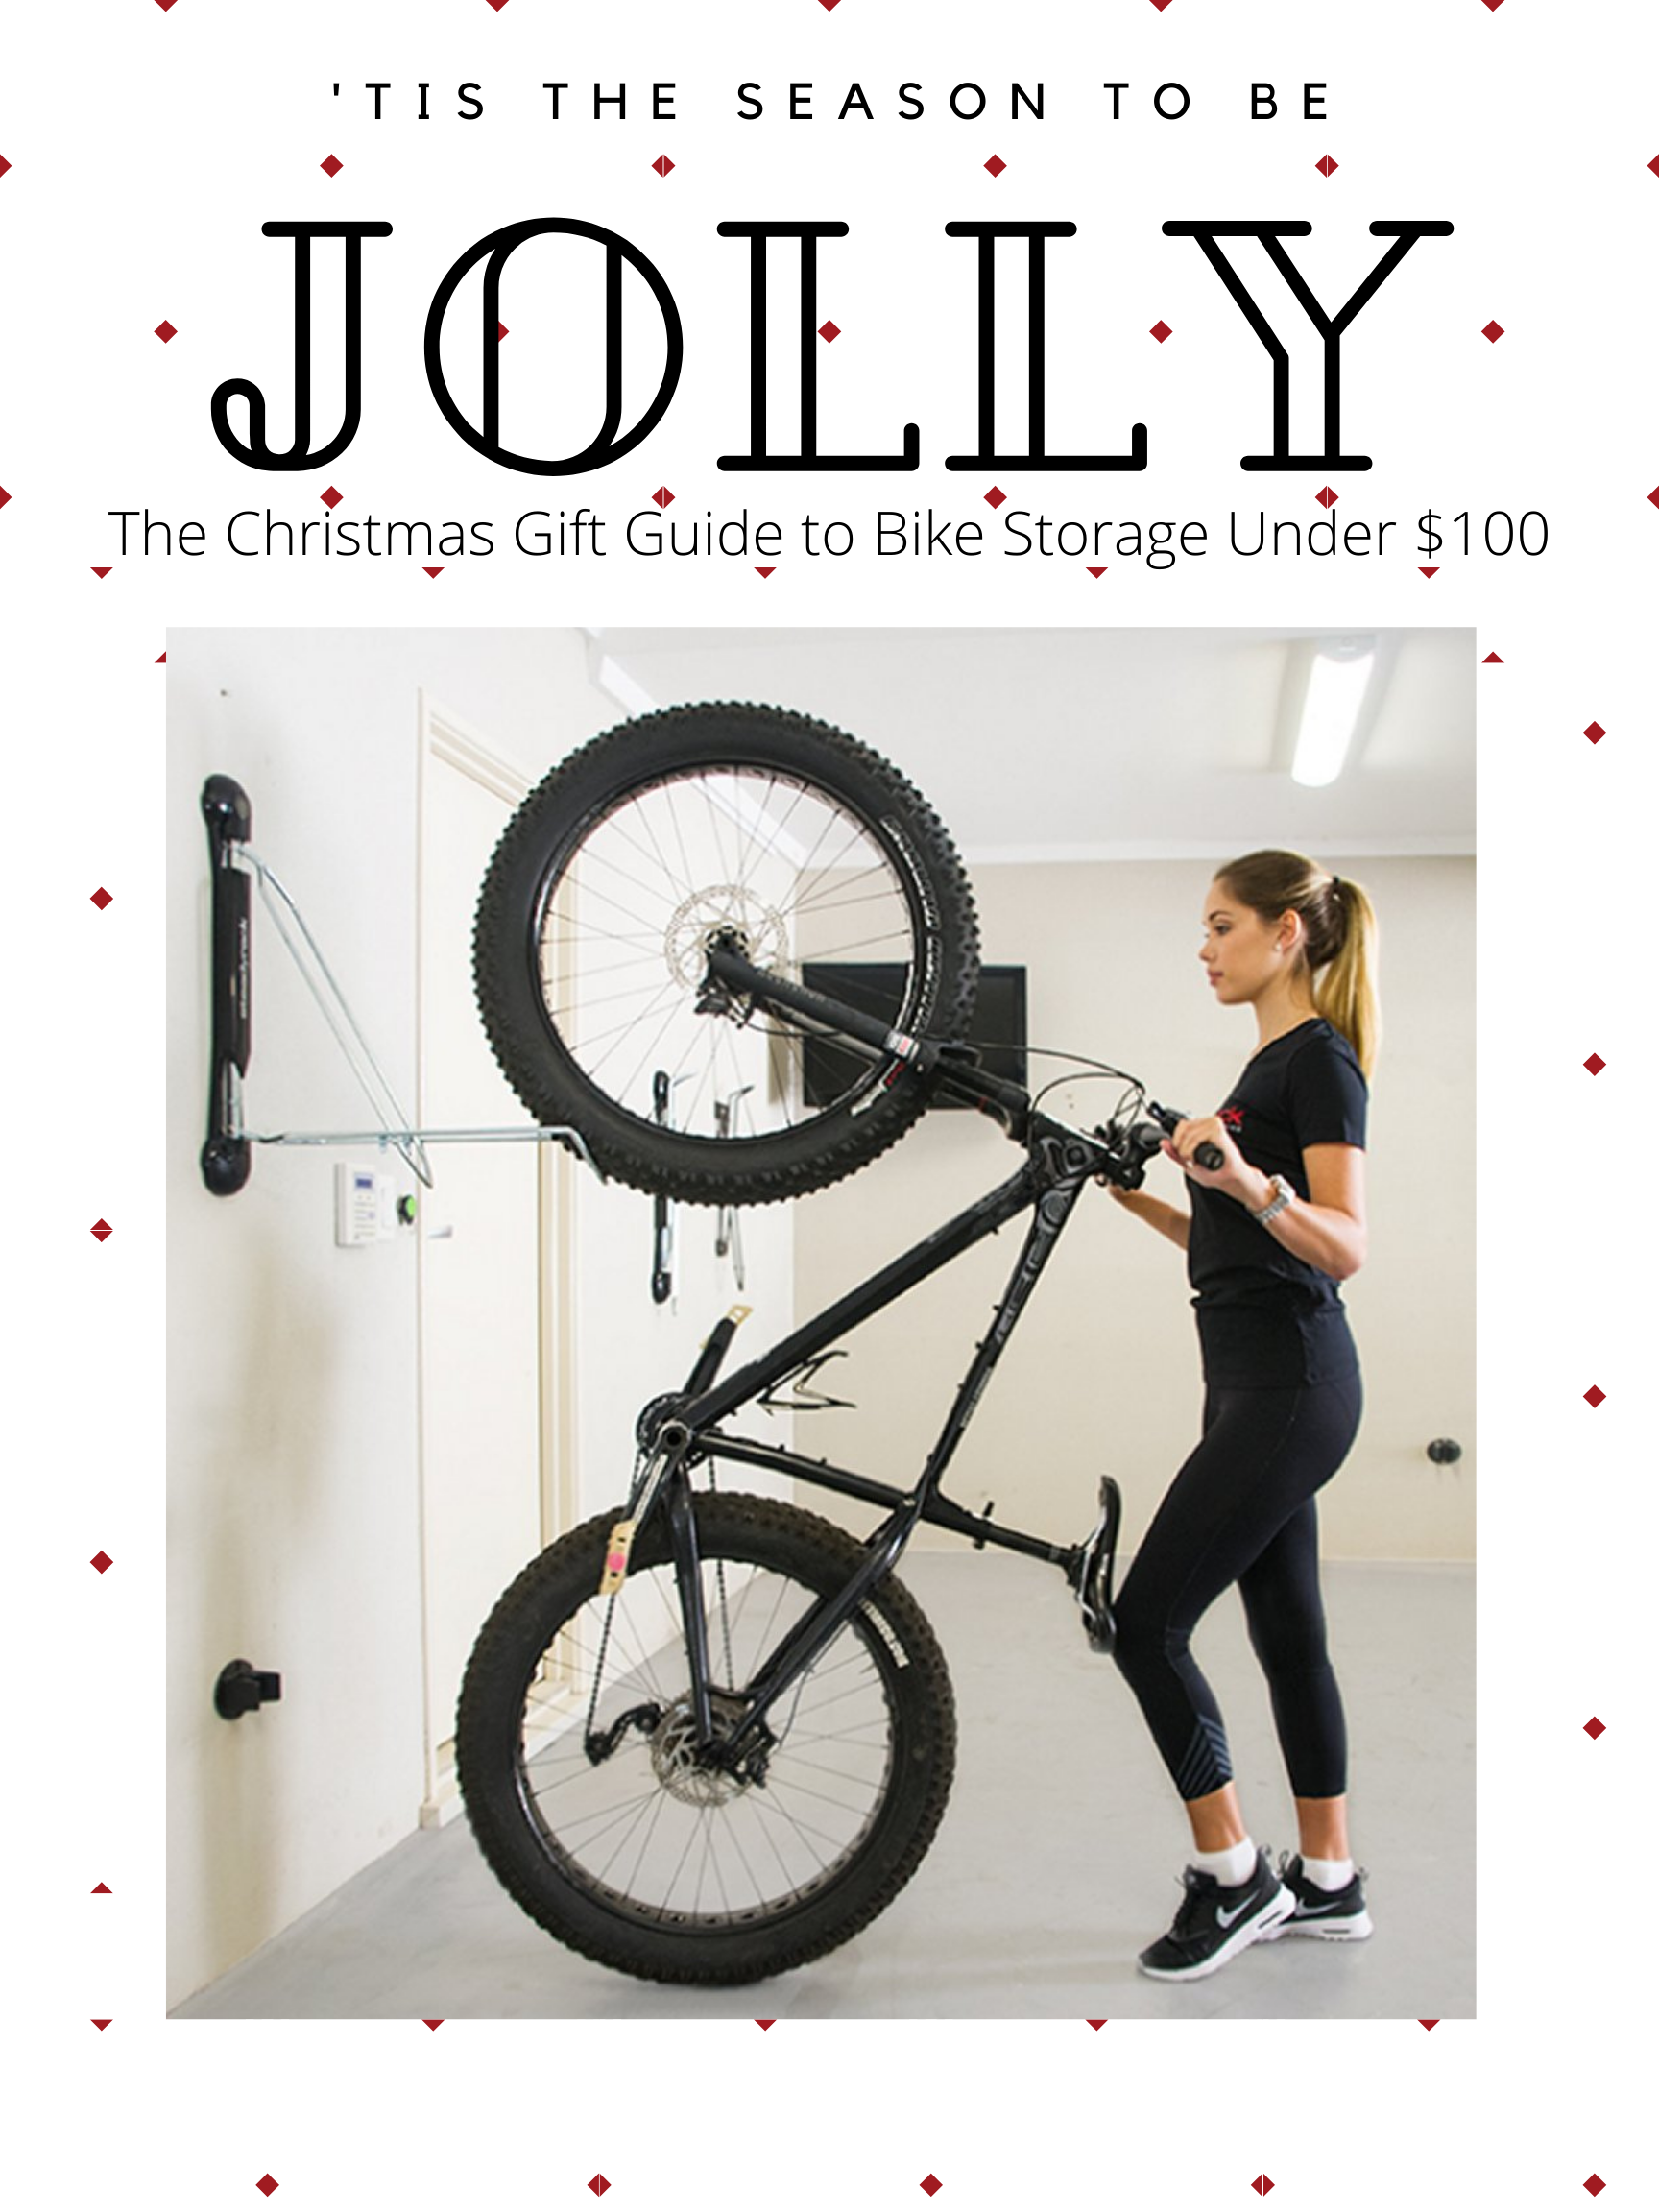 https://cdn11.bigcommerce.com/s-hbi7s/product_images/uploaded_images/the-christmas-gift-guide-to-bike-storage-under-100.png